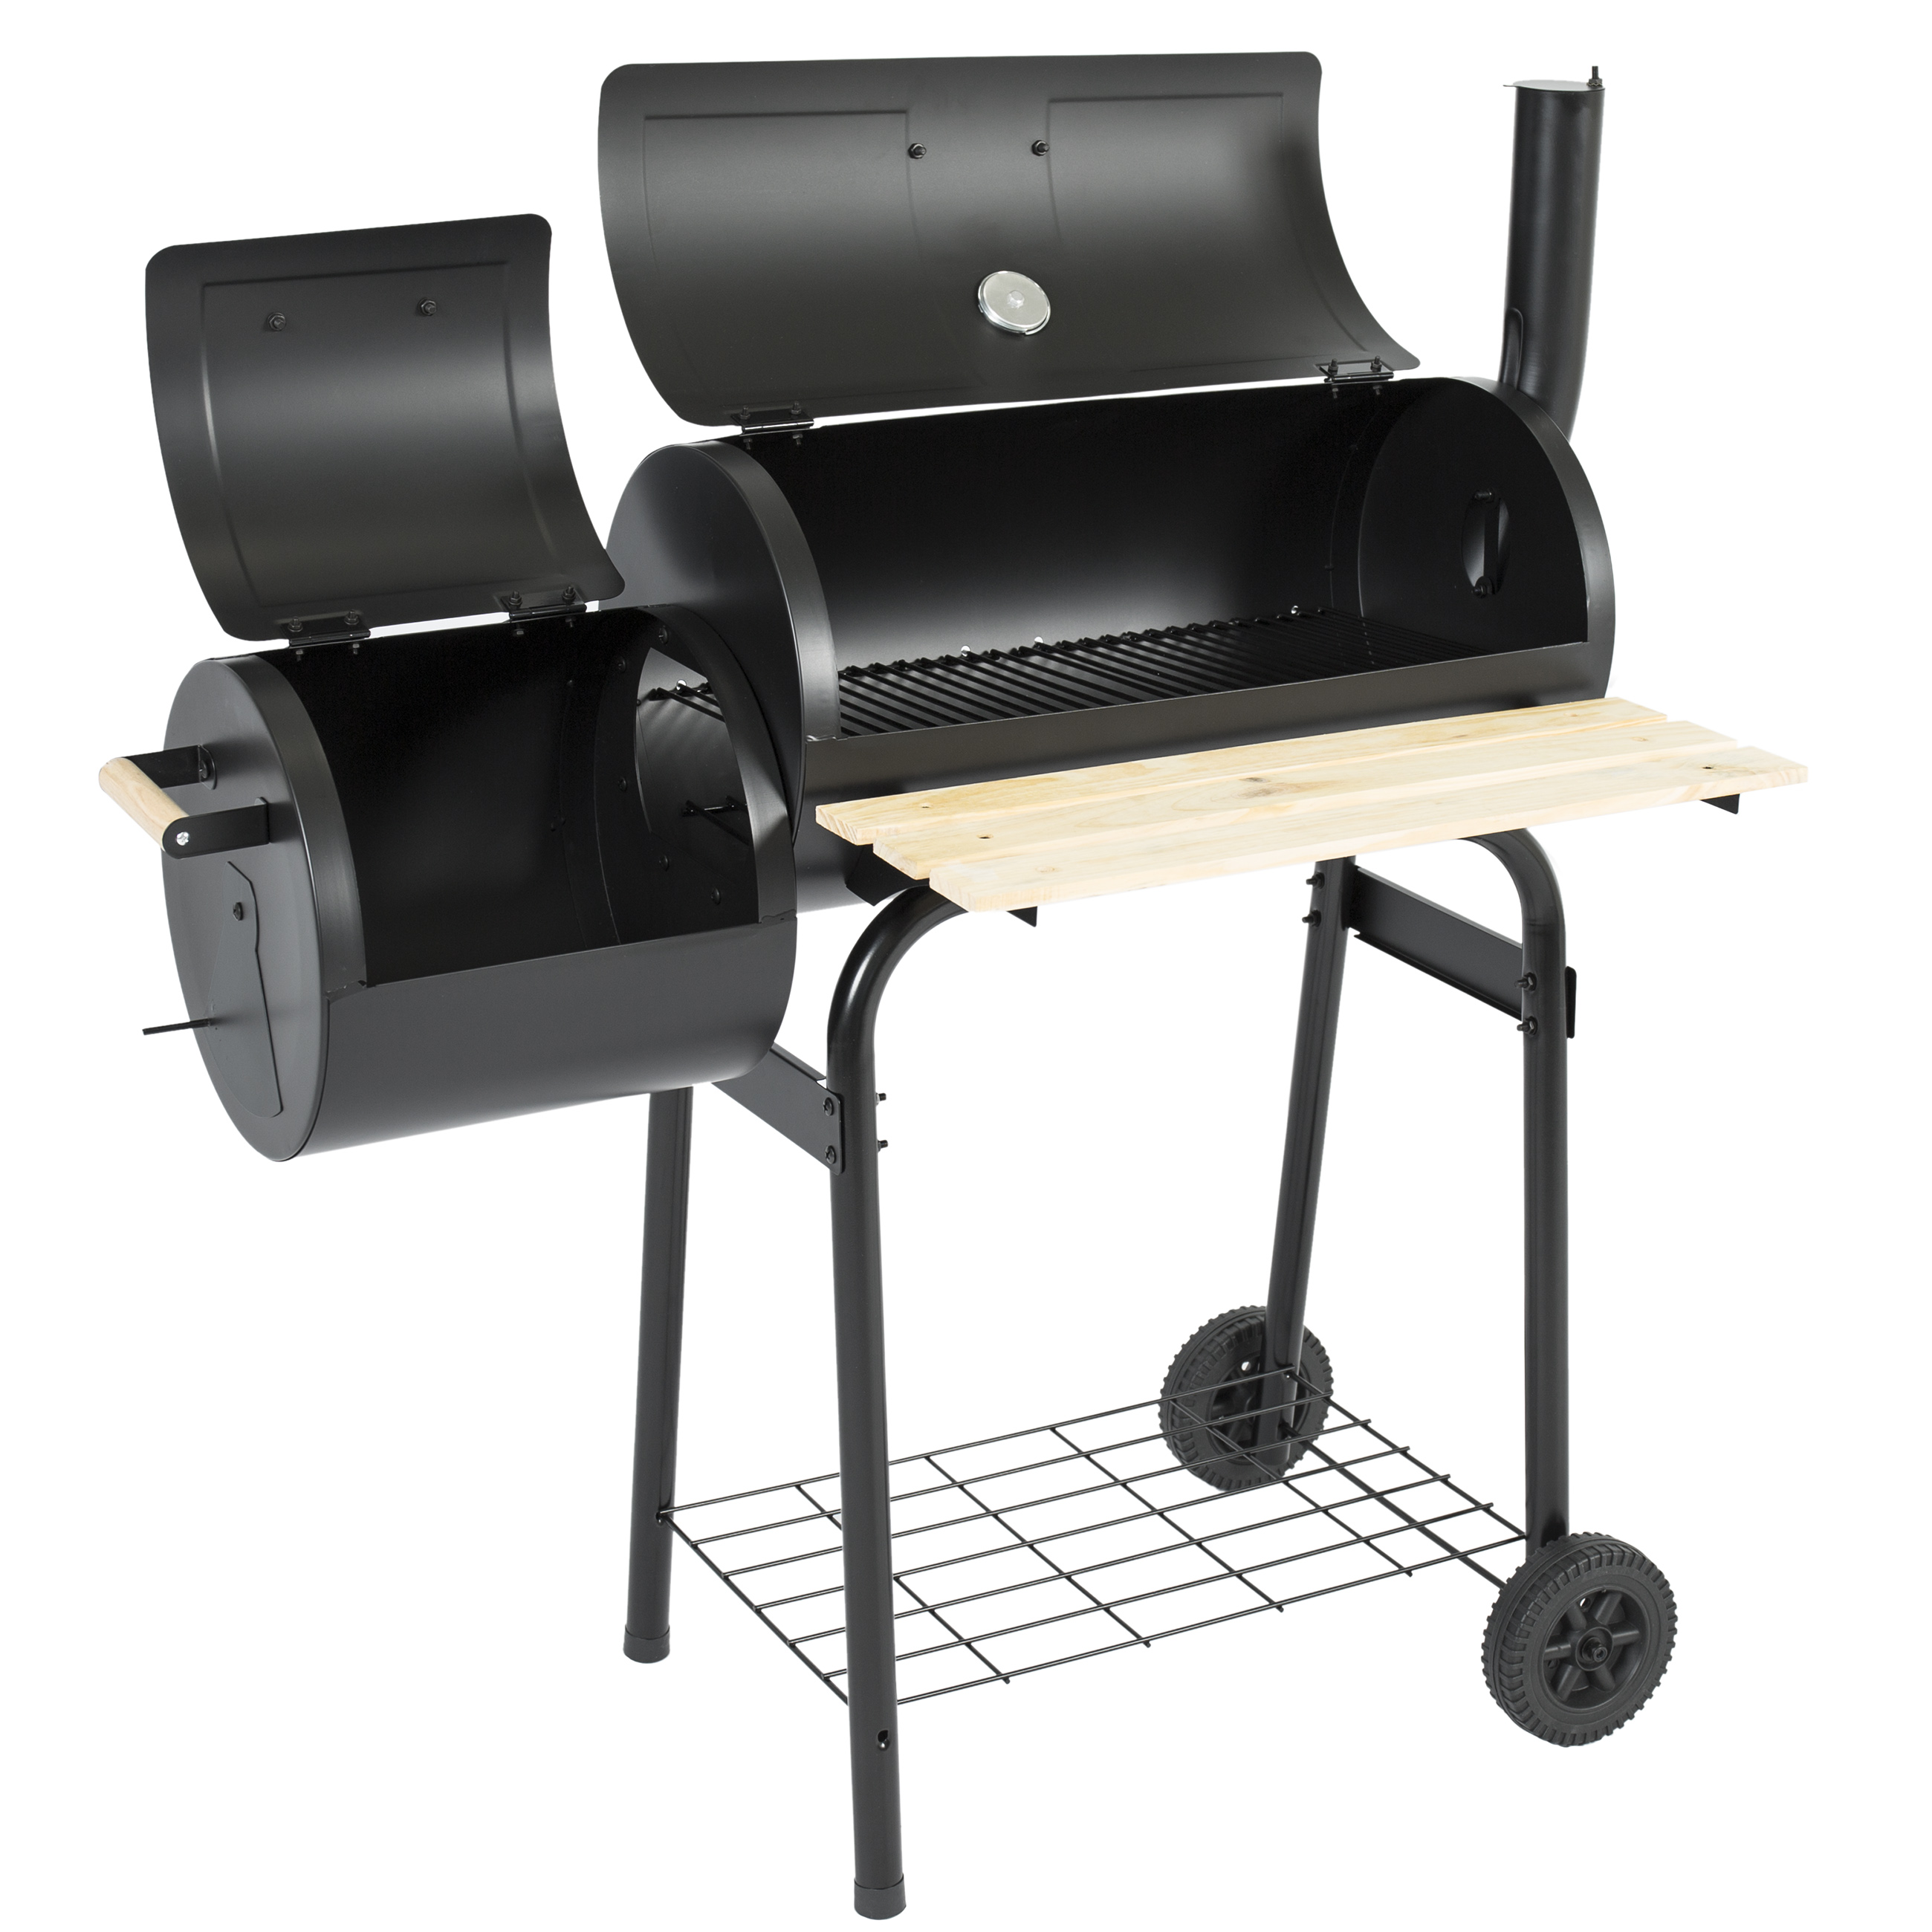 RUN!! Best Choice Products Charcoal Grill and Smoker Combo ONLY $64.99!!